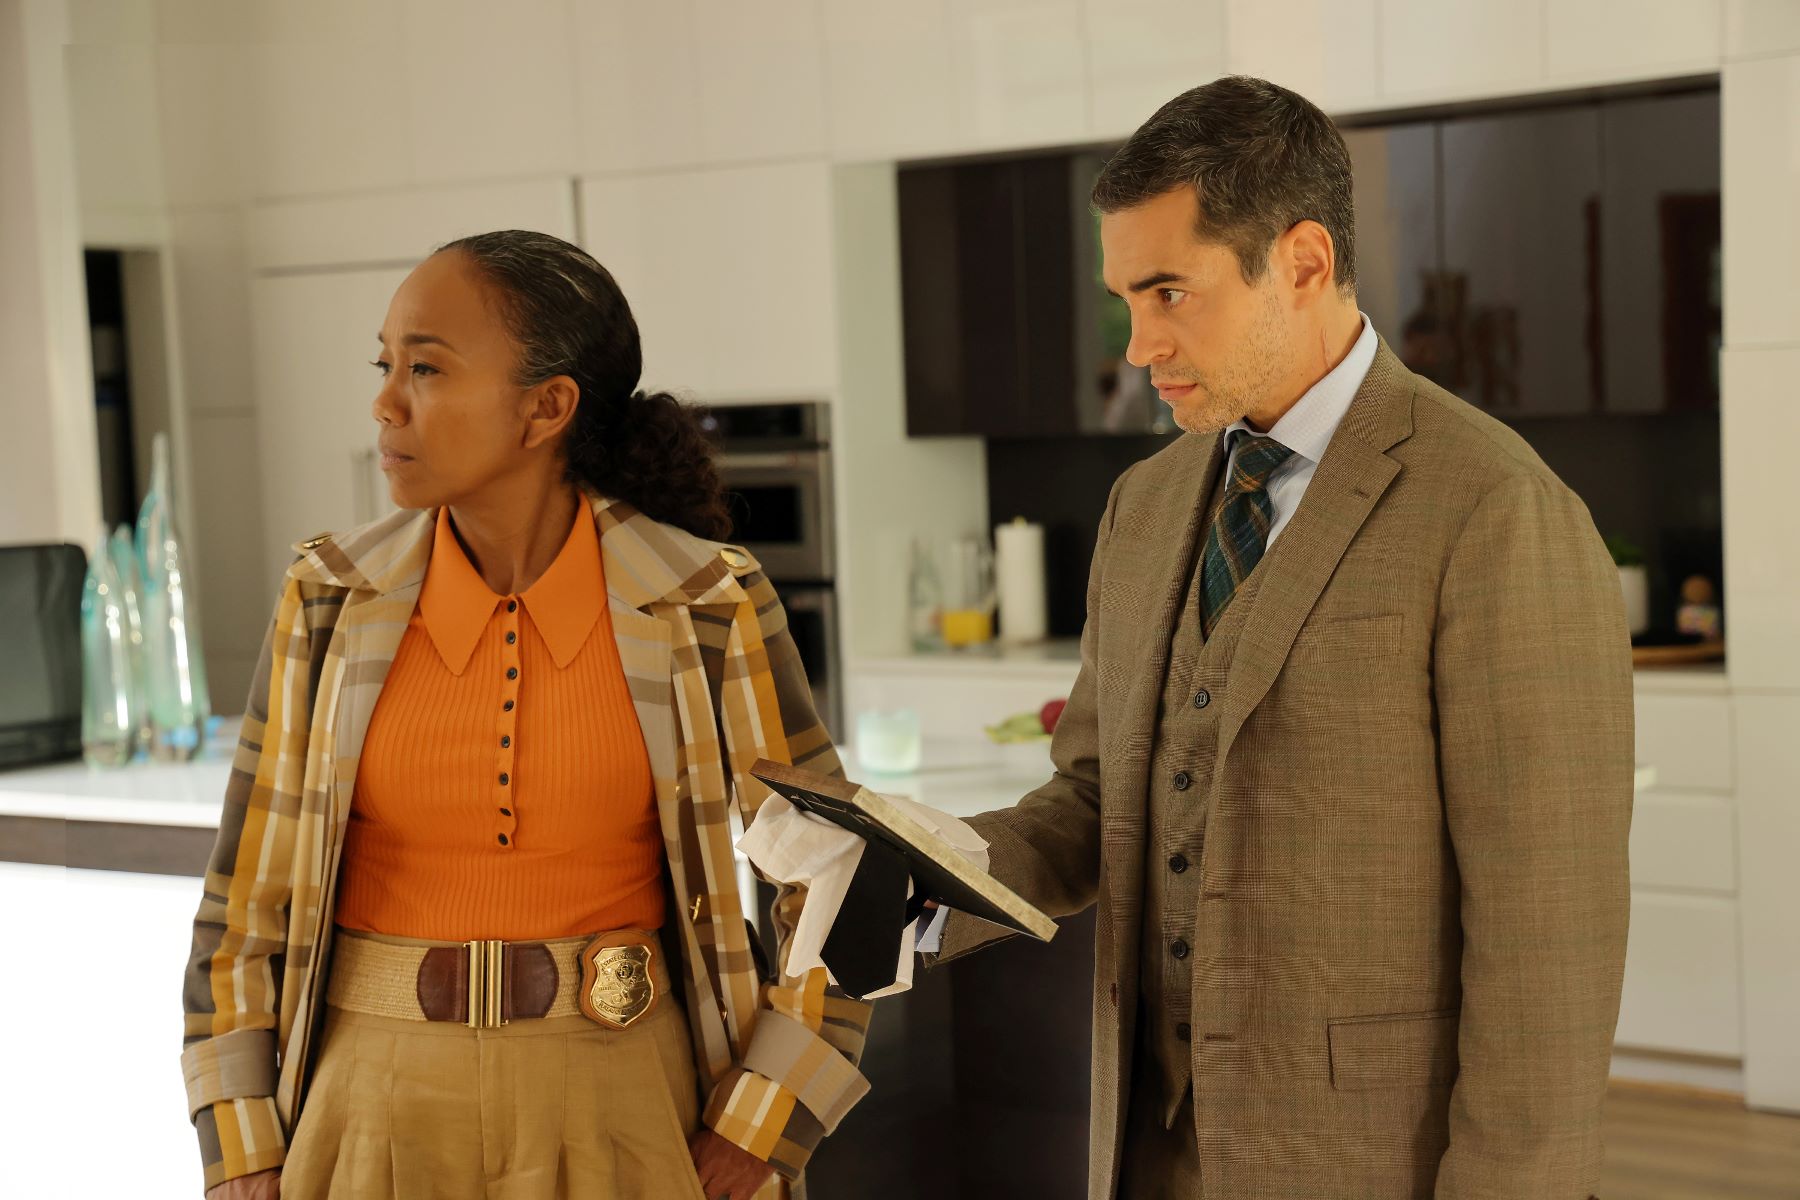 Sonja Sohn and Ramón Rodríguez, in character as Amanda Wagner and Will Trent, in the 'Will Trent' series premiere. Amanda wears a brown and light orange plaid coat over an orange shirt and tan pants. Will wears a brown three-piece suit with a dark green plaid tie.